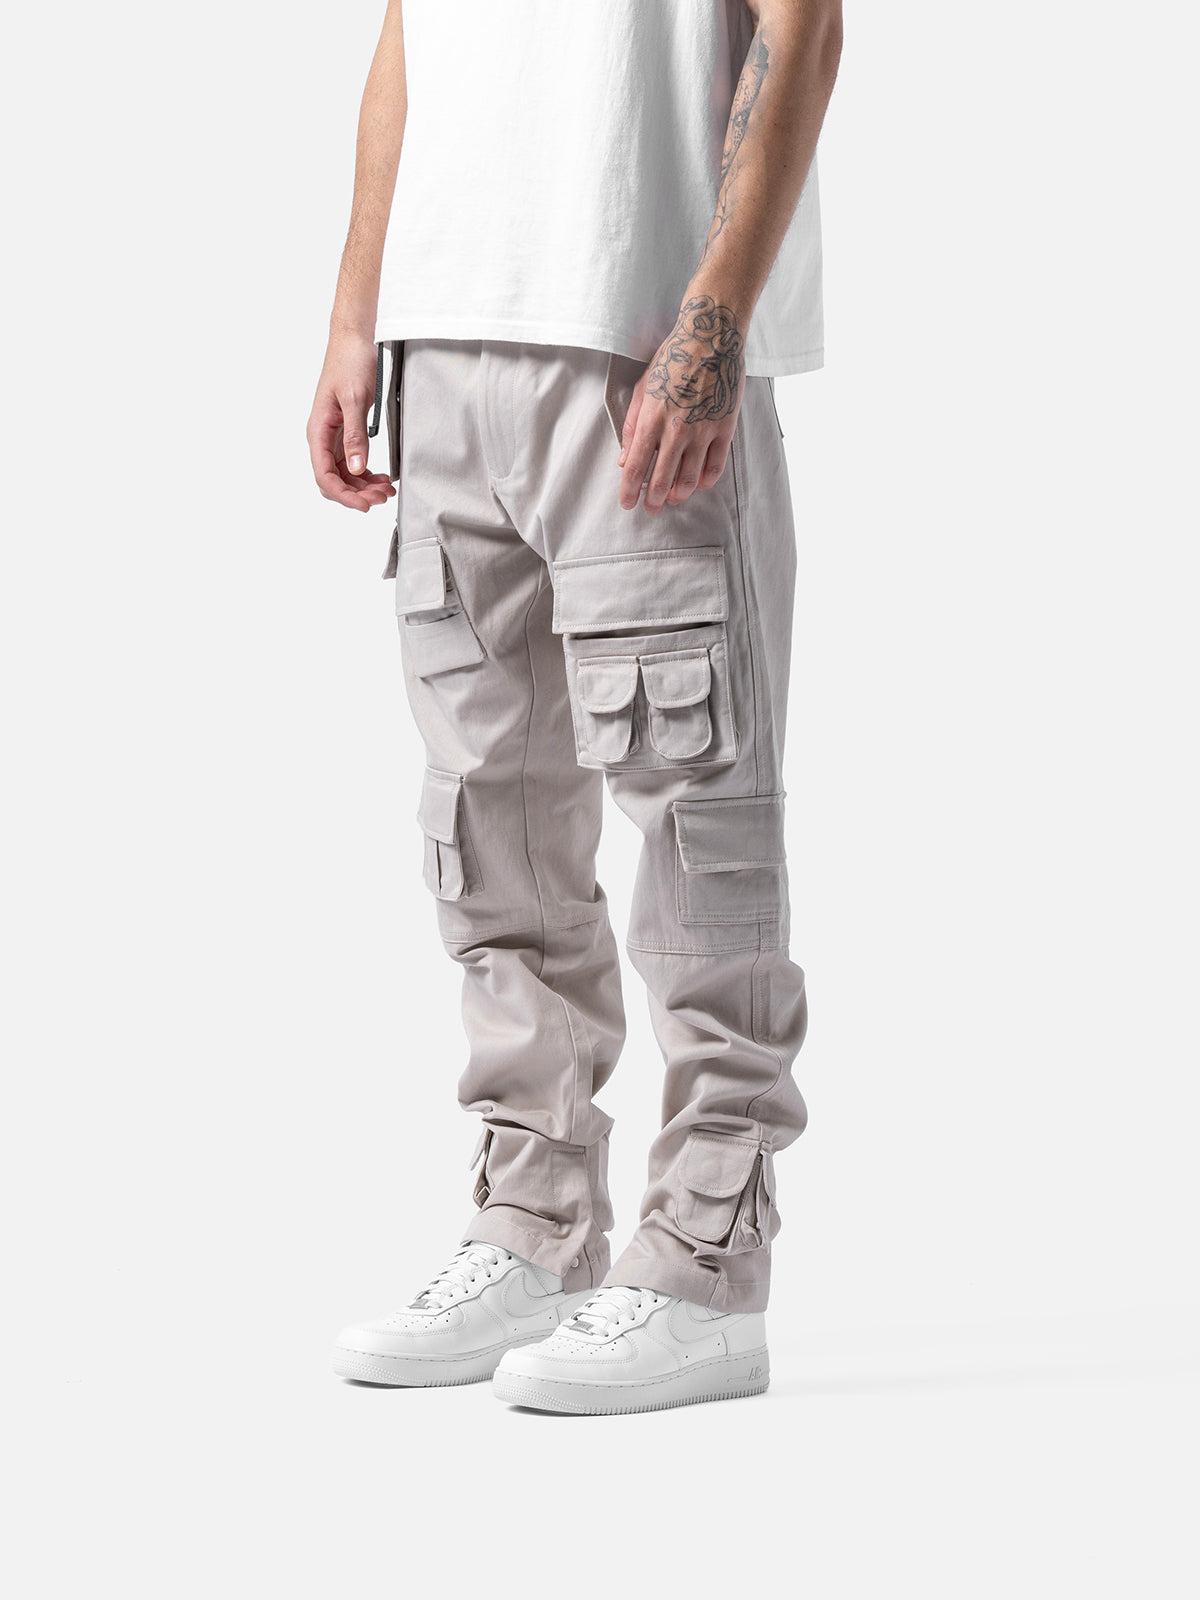 These pants give a whole new meaning to cargo style as they are not only  functional but allow for... | Tactical cargo pants, Cargo pants men, Cotton  casual pants